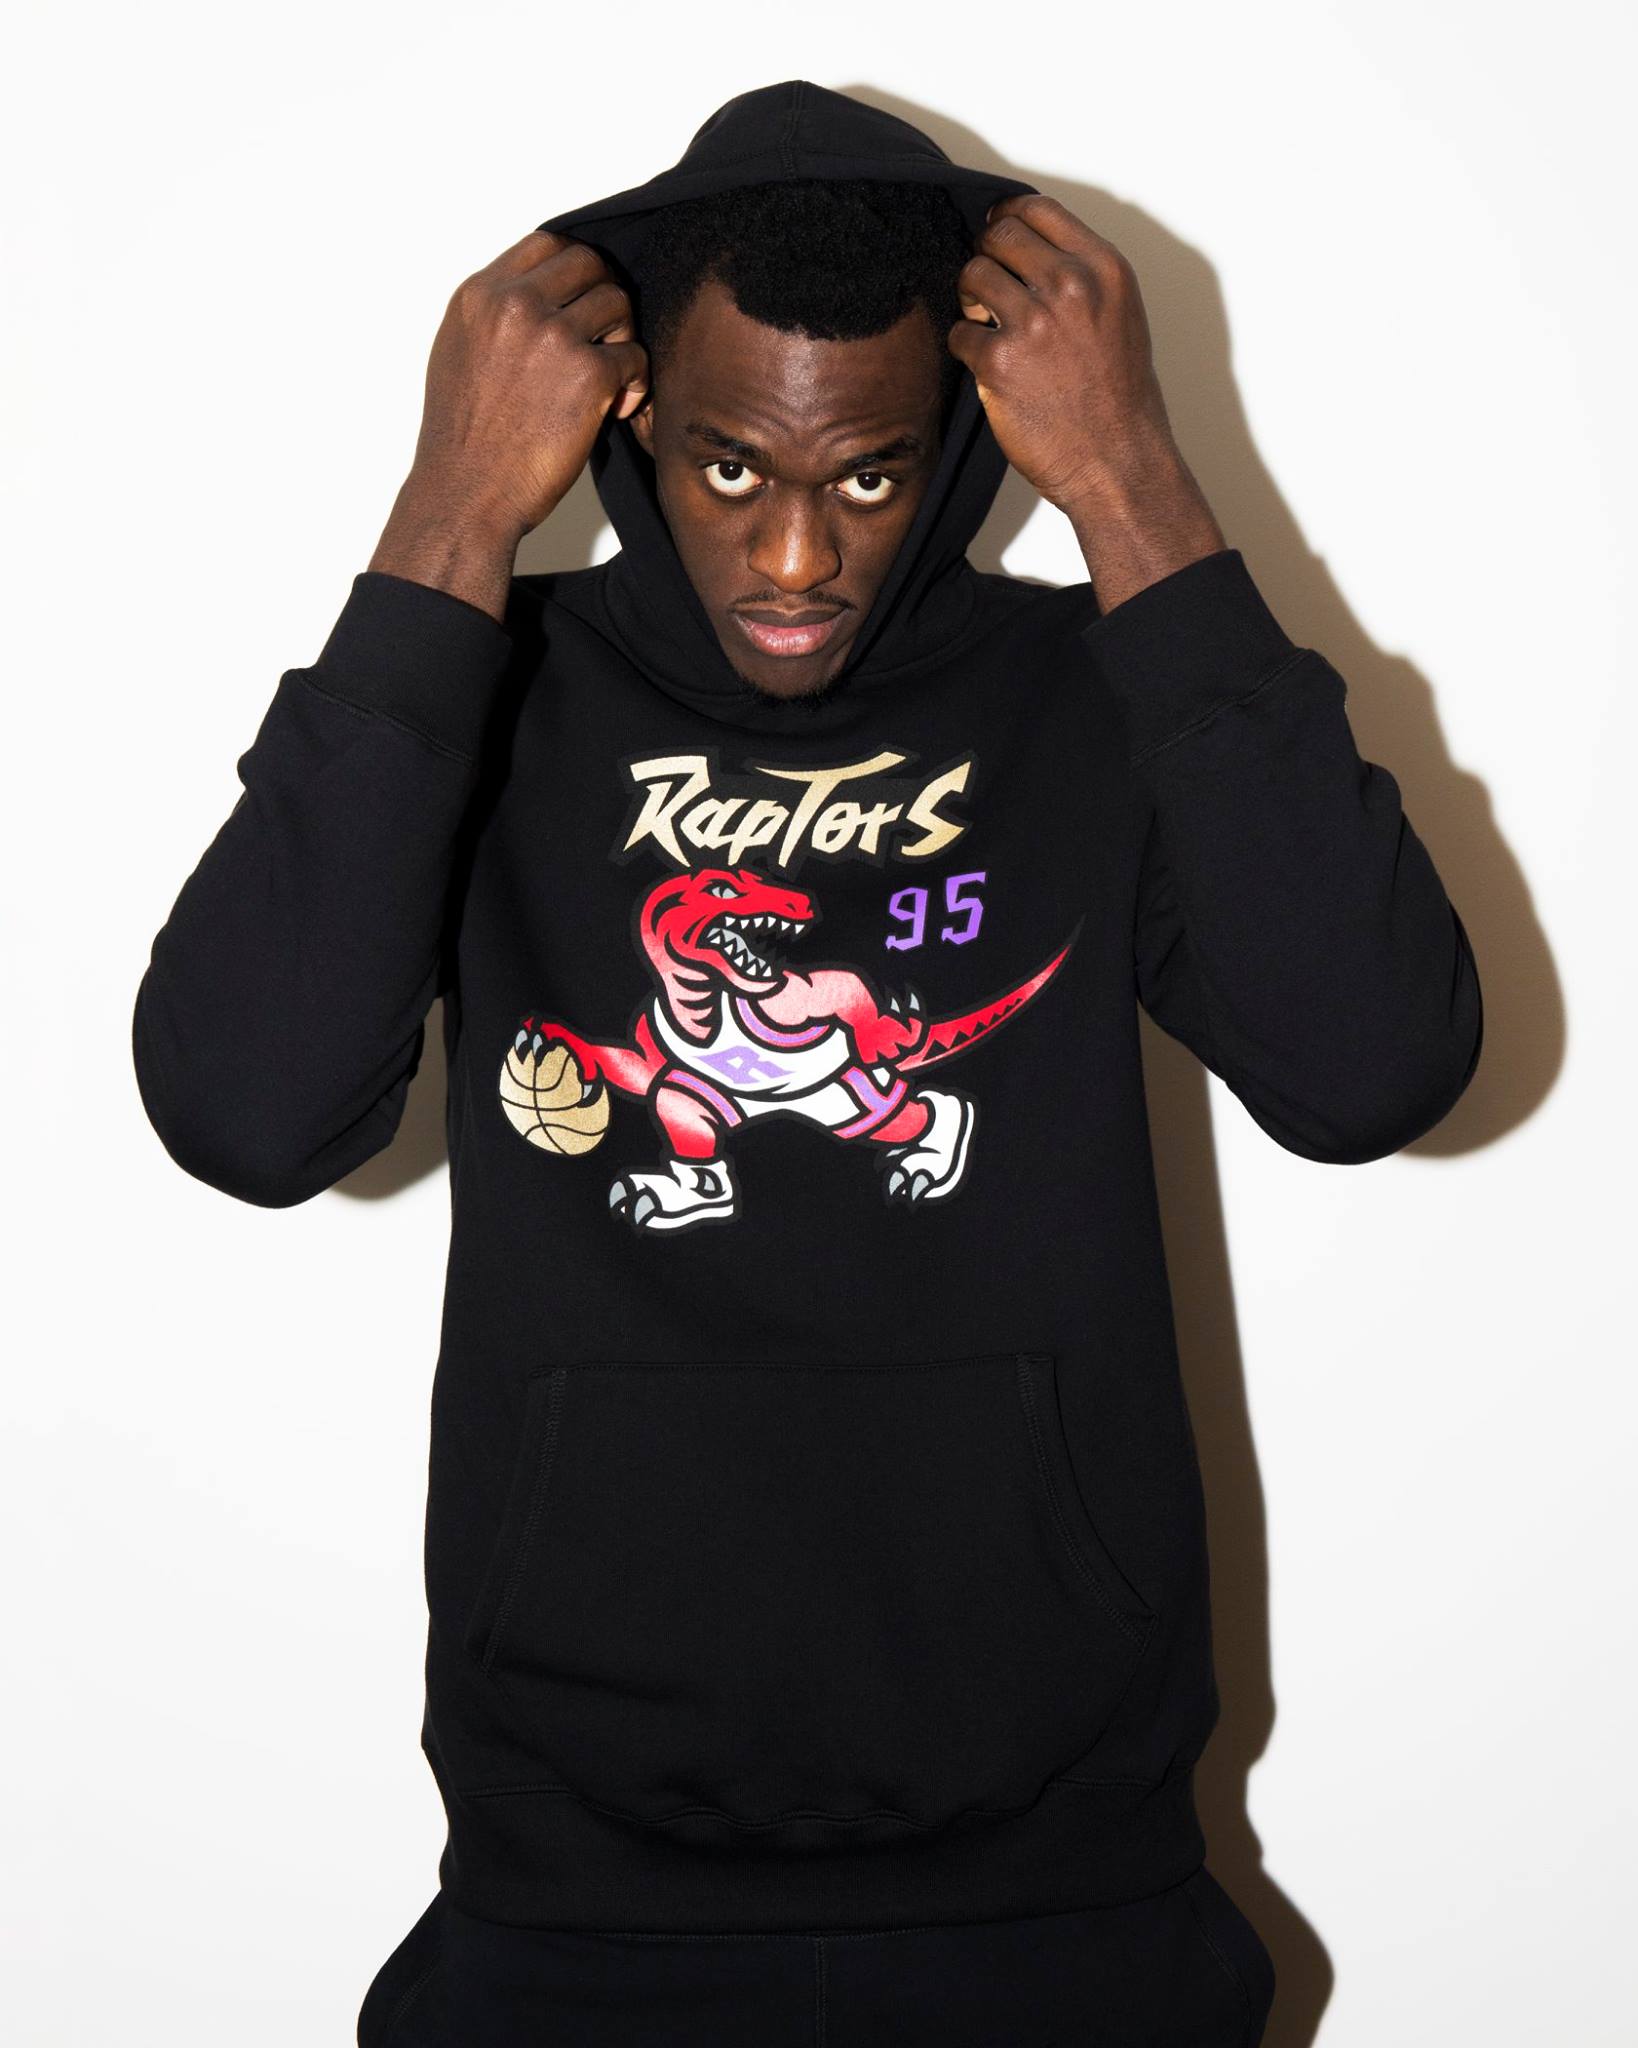 People are now reselling Toronto Raptors OVO merch for way higher prices